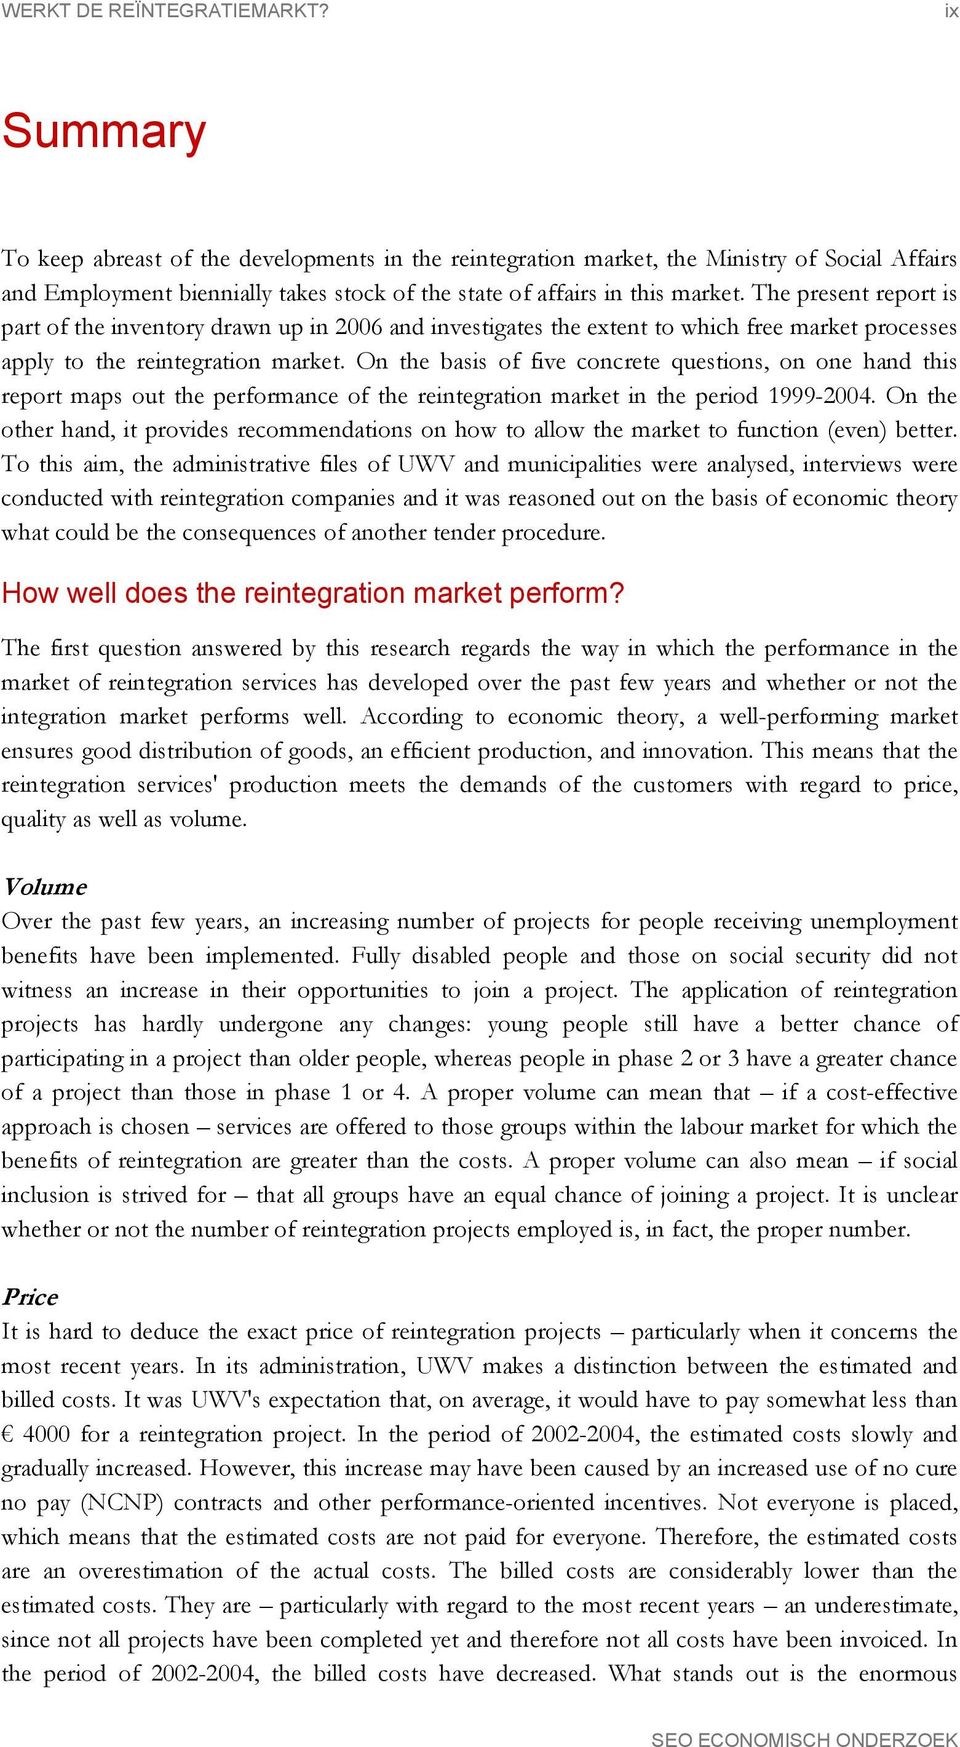 The present report is part of the inventory drawn up in 2006 and investigates the extent to which free market processes apply to the reintegration market.